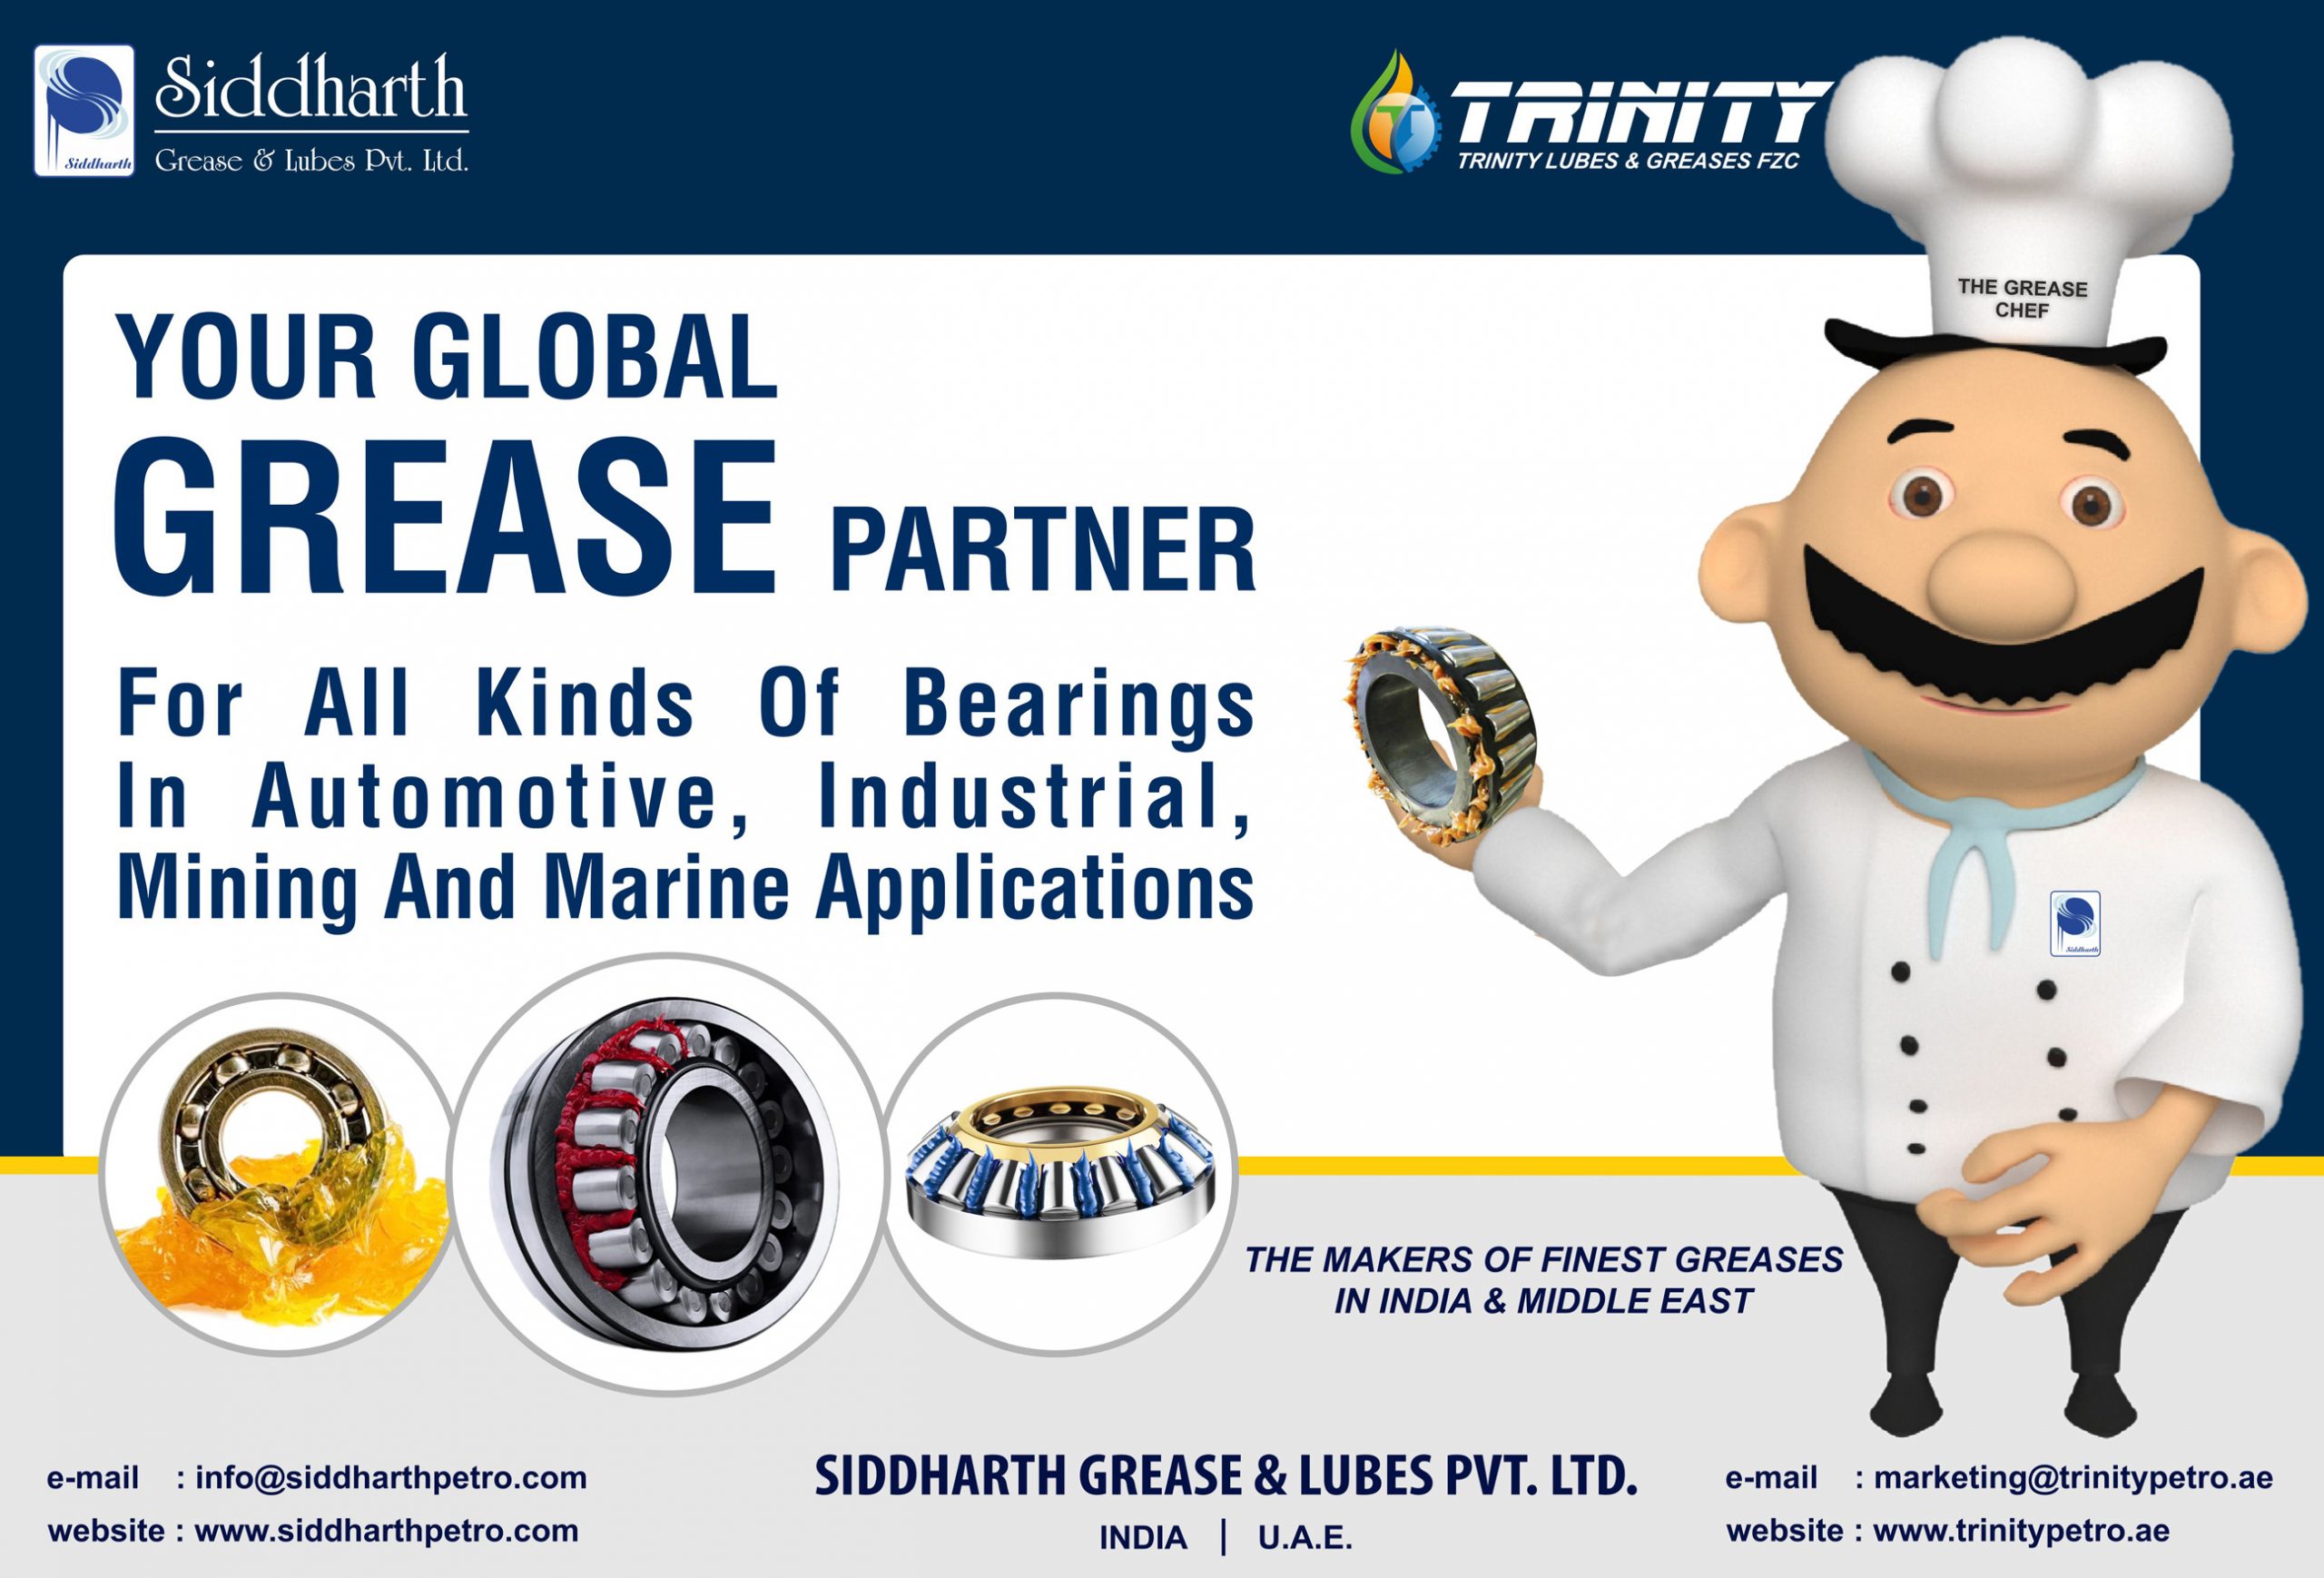 Siddharth Grease & Lubes